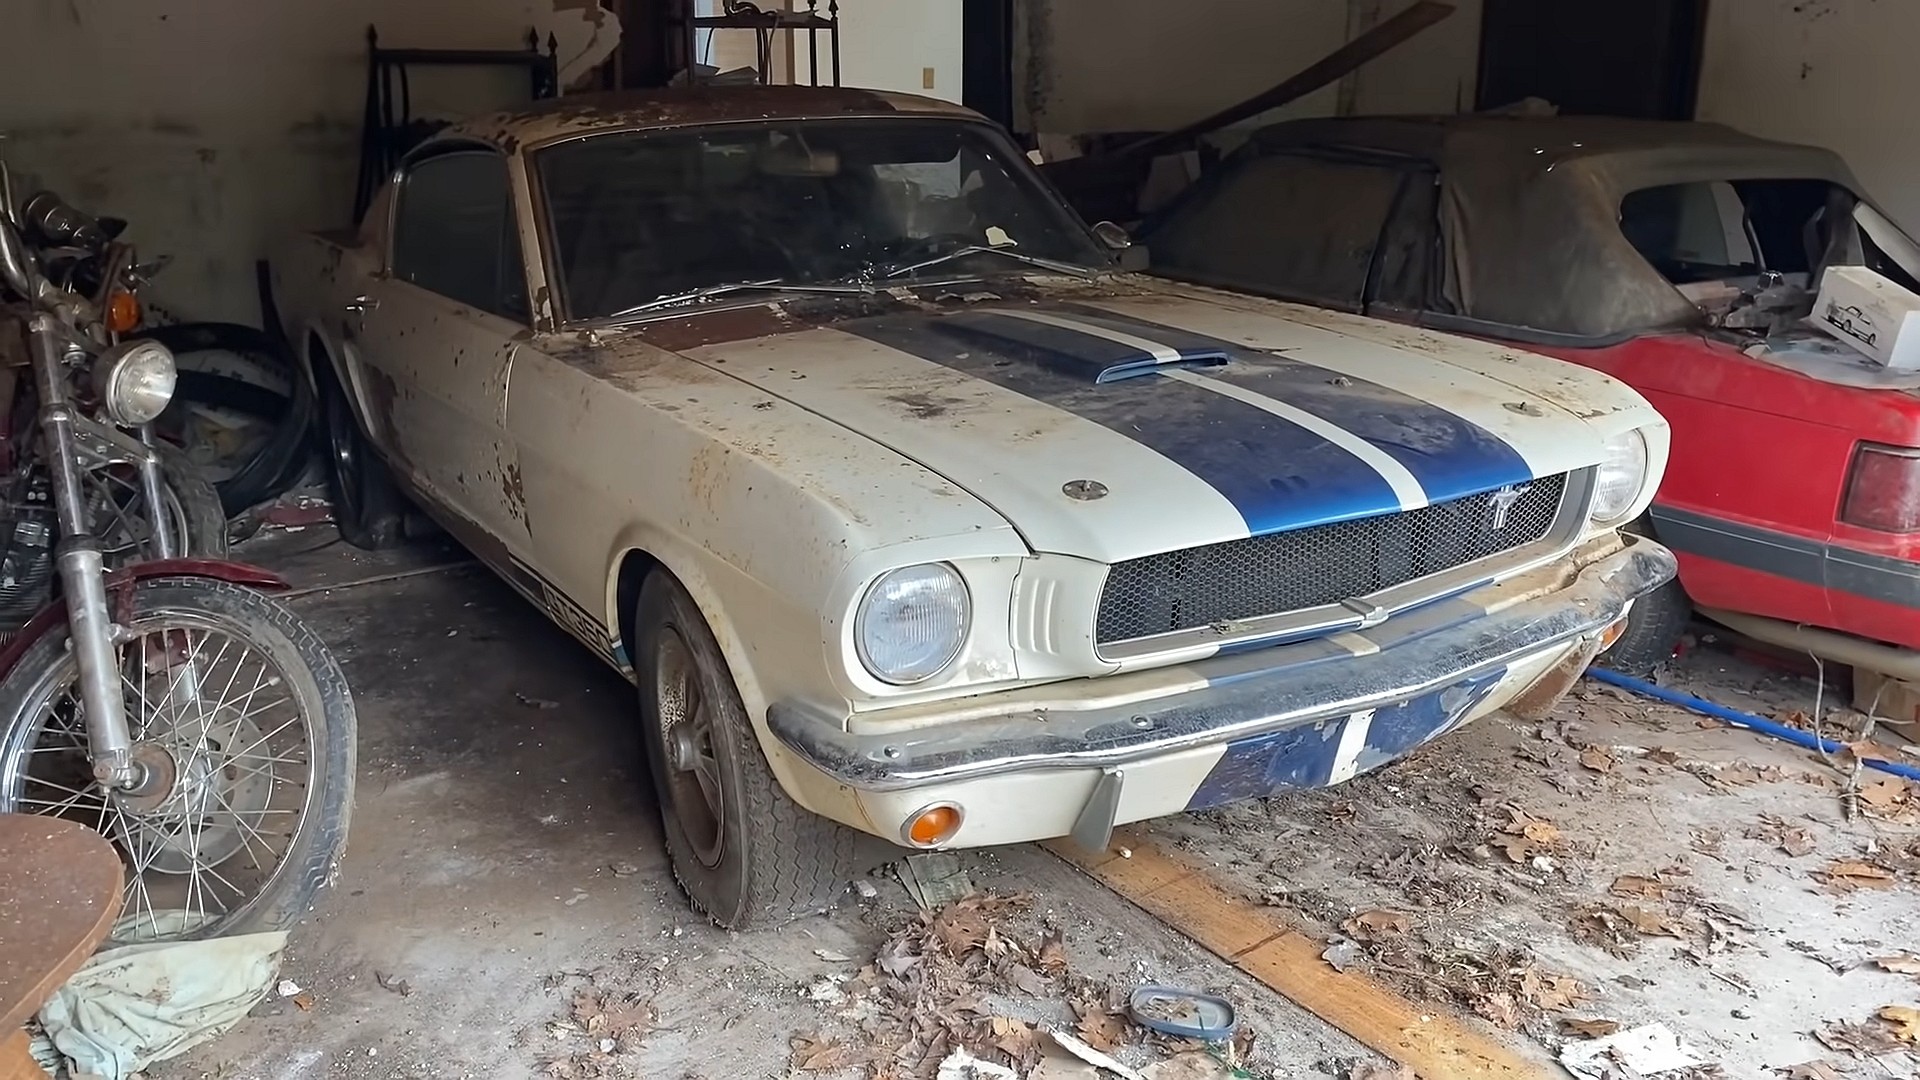 barn find gold 1965 shelby mustang gt350 stored for decades in abandoned house 9